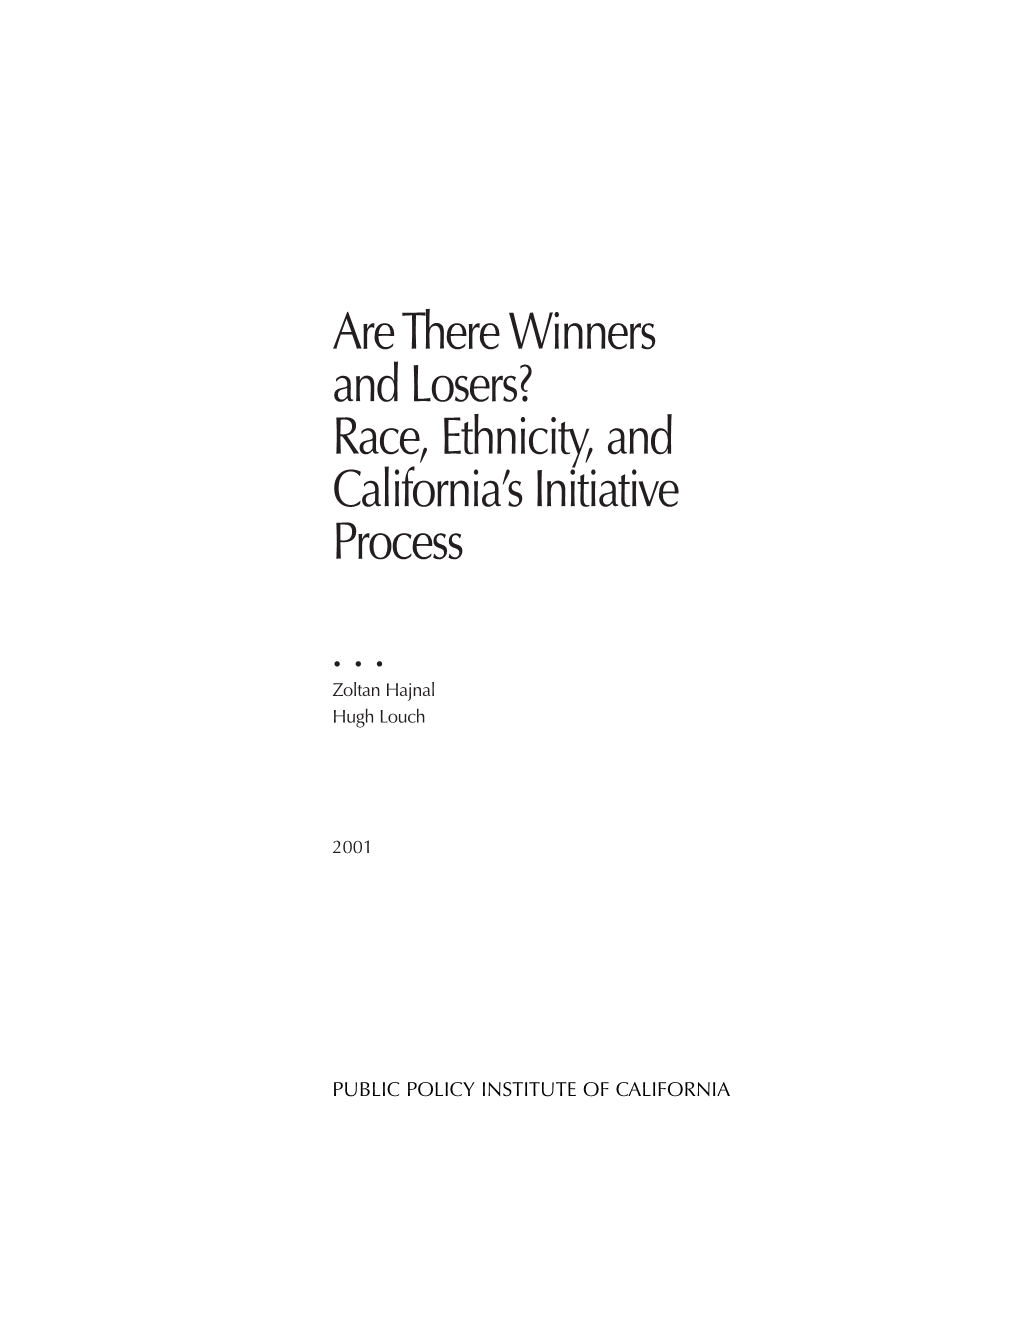 Are There Winners and Losers? Race, Ethnicity, and California's